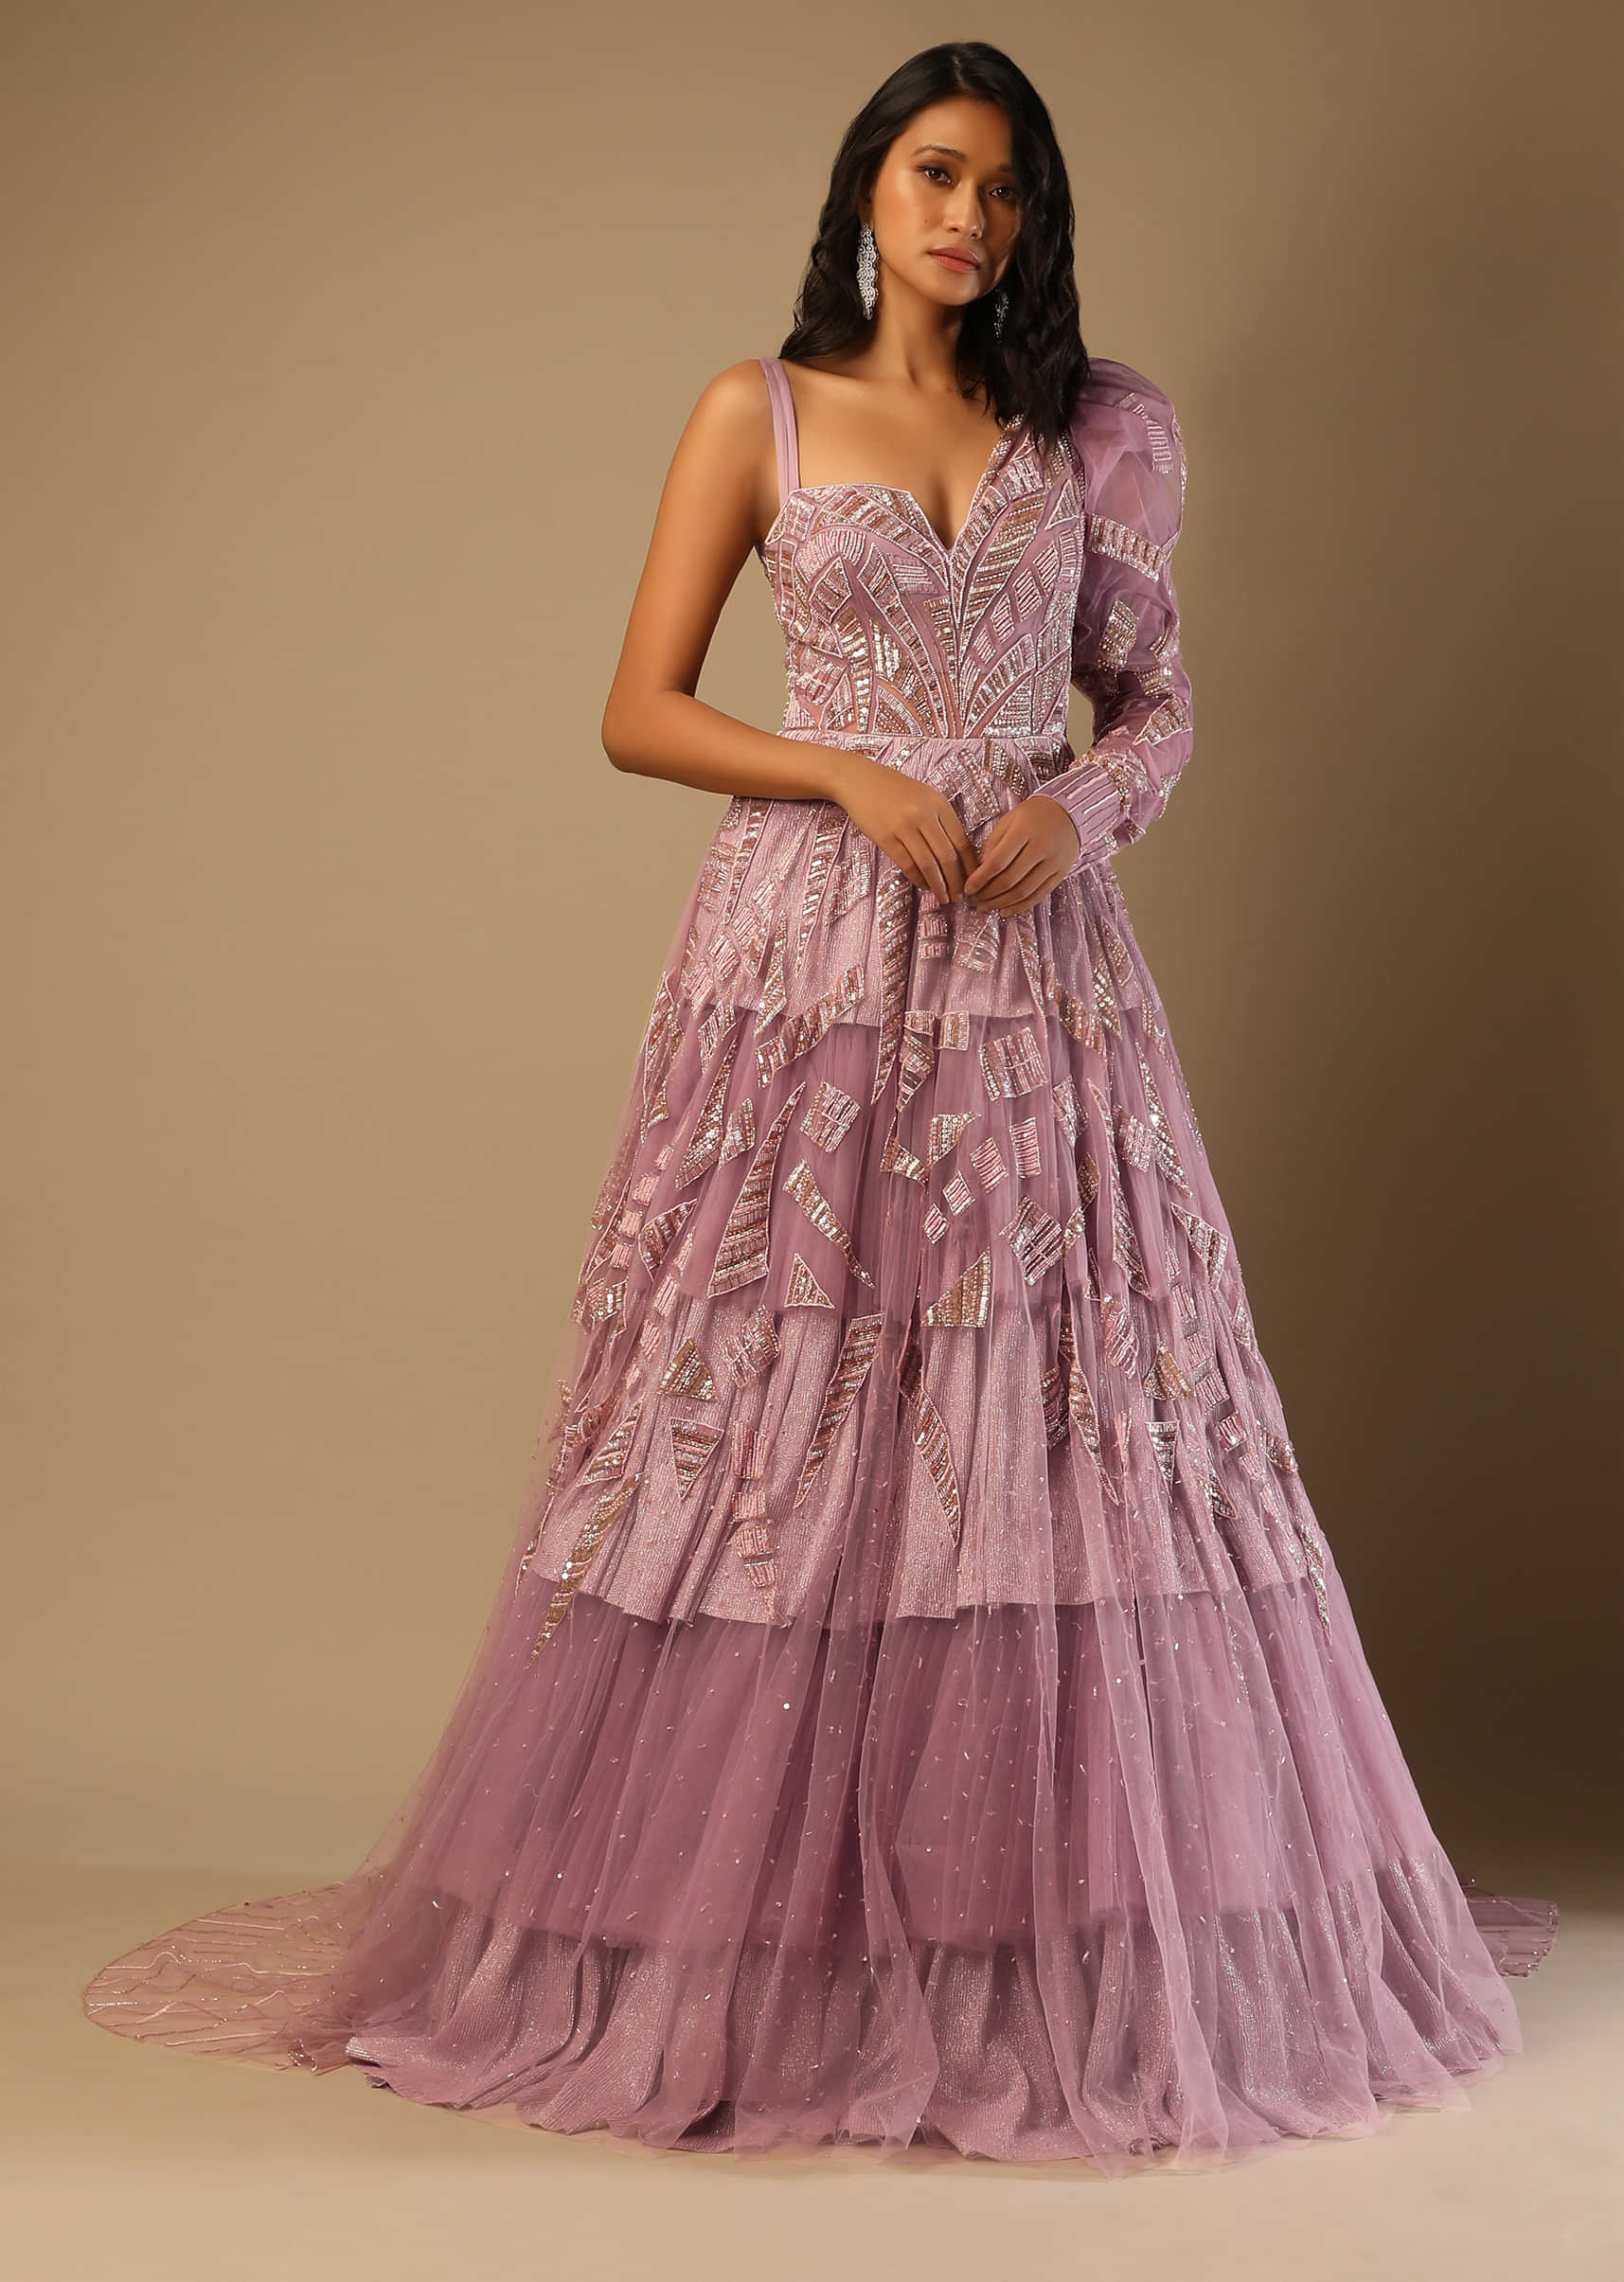 Frozen Mauve Gown With Hand Embroidery And A One Sided Fancy Puff Sleeves   